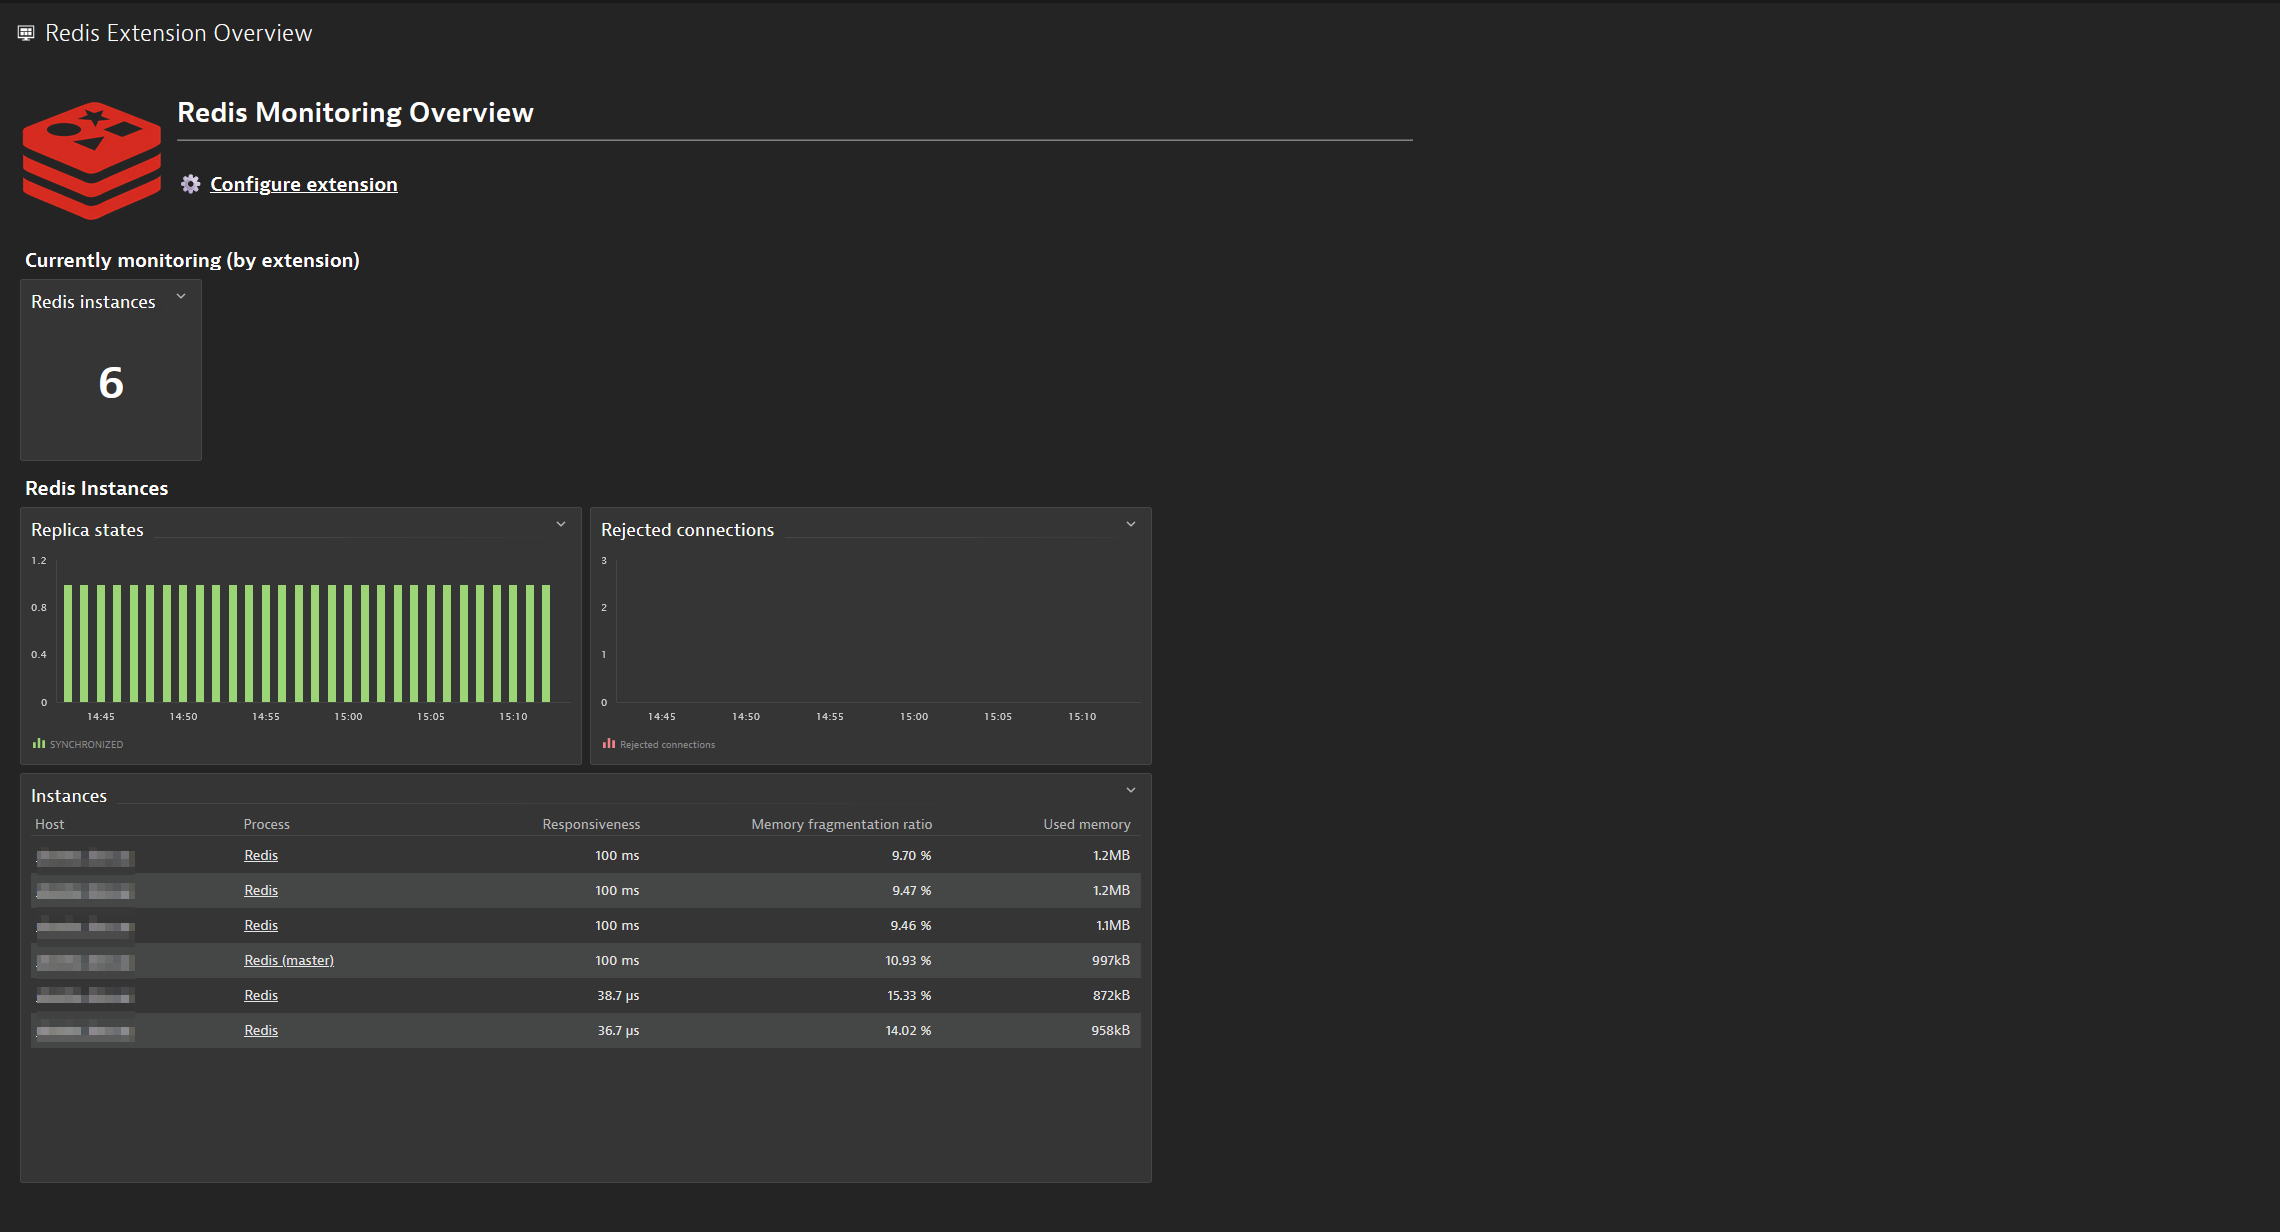 The overview dashboard for the Redis extension including a link to the configuration screen and some high-level Redis metrics.